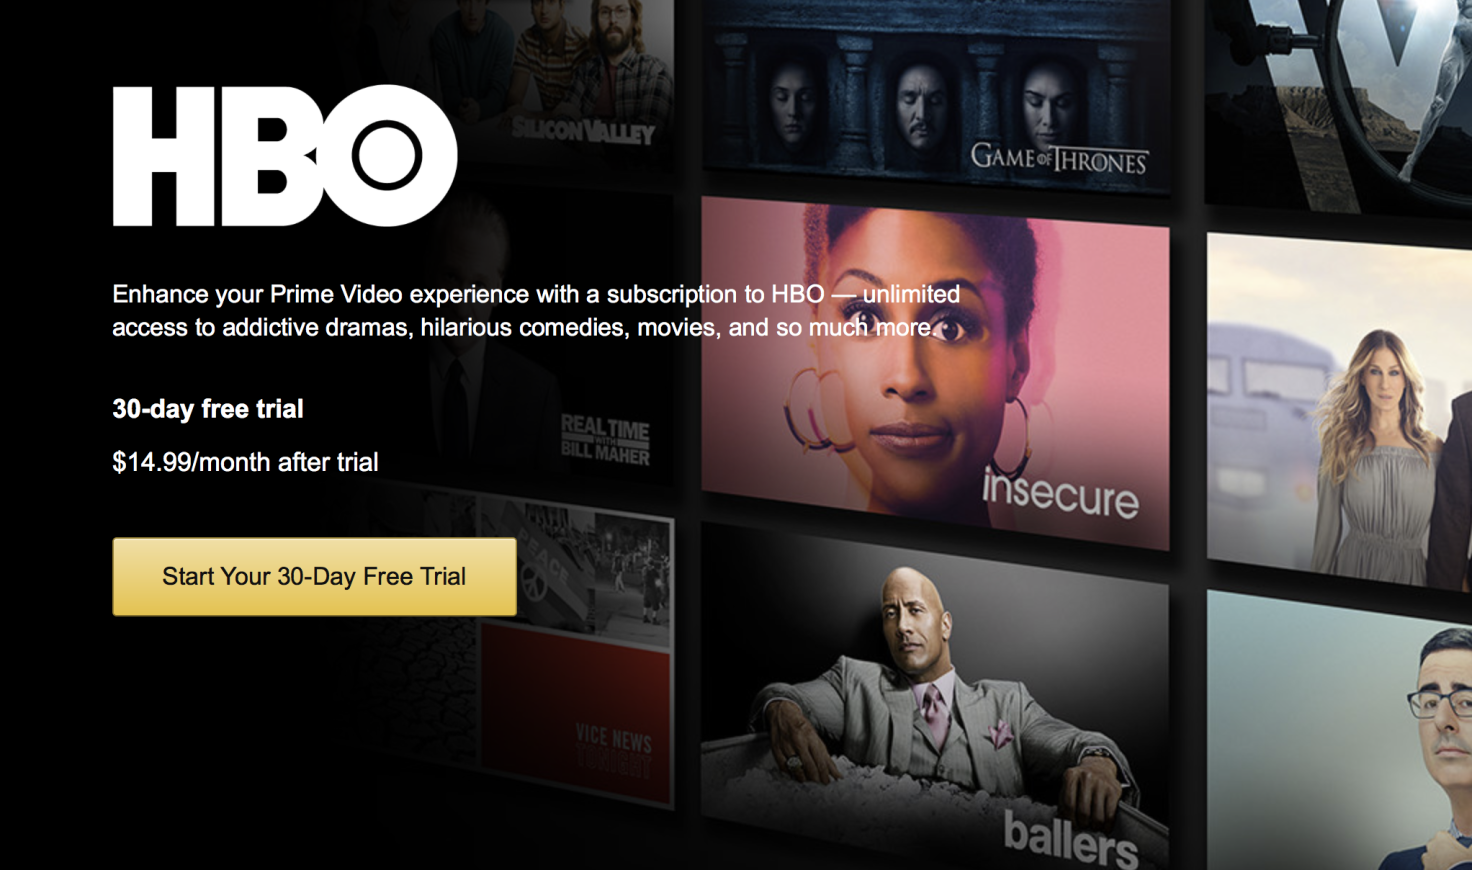 Amazon Prime Hbo Premium Networks Now Available But For A Price